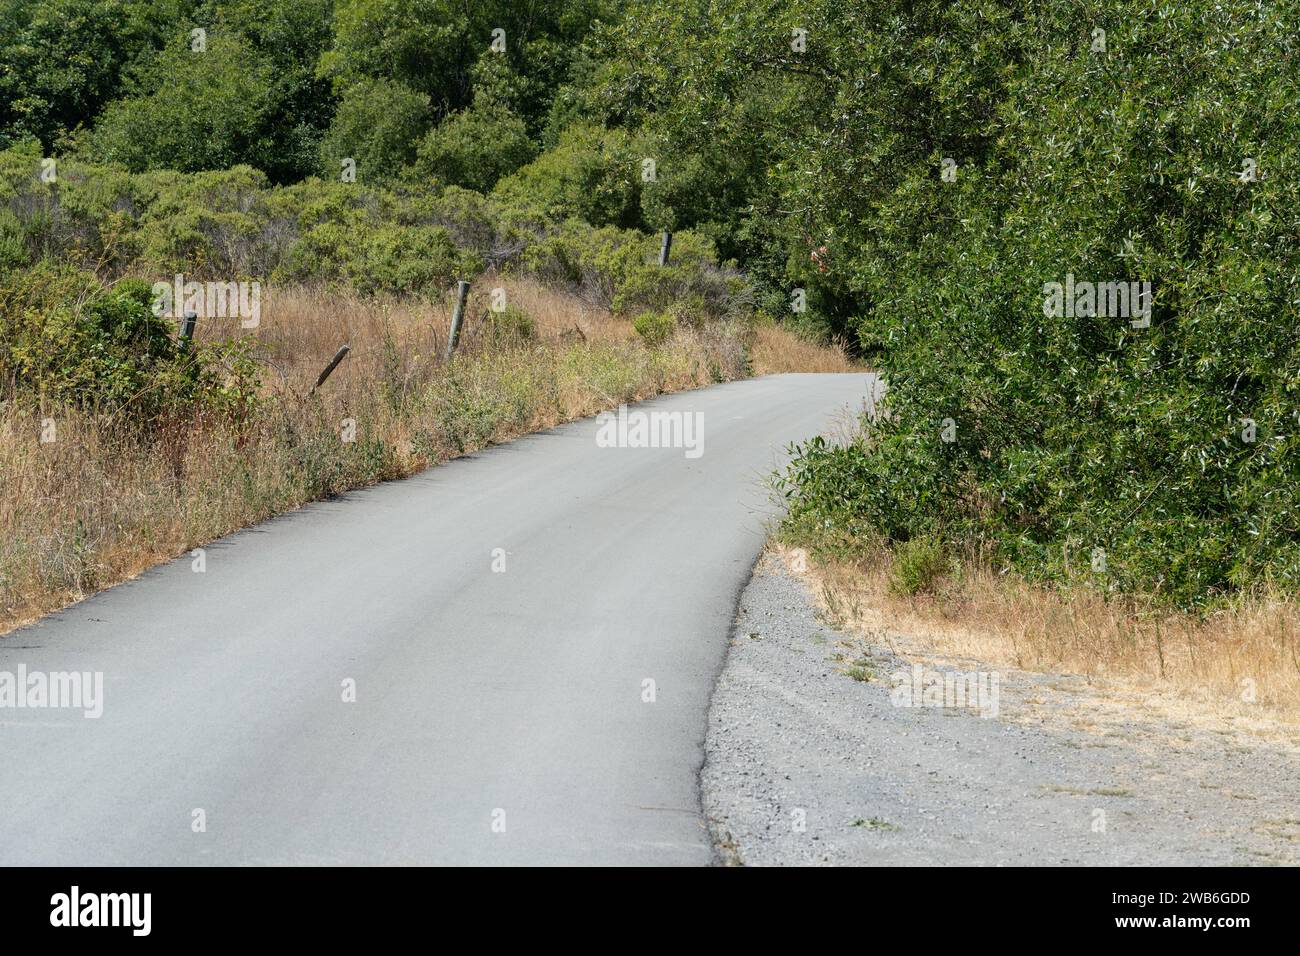 Slight bend or curve in the road ahead, Warning for a curve to the right, Warning  Road Sign on the roadside with pine trees forest background Stock Photo -  Alamy